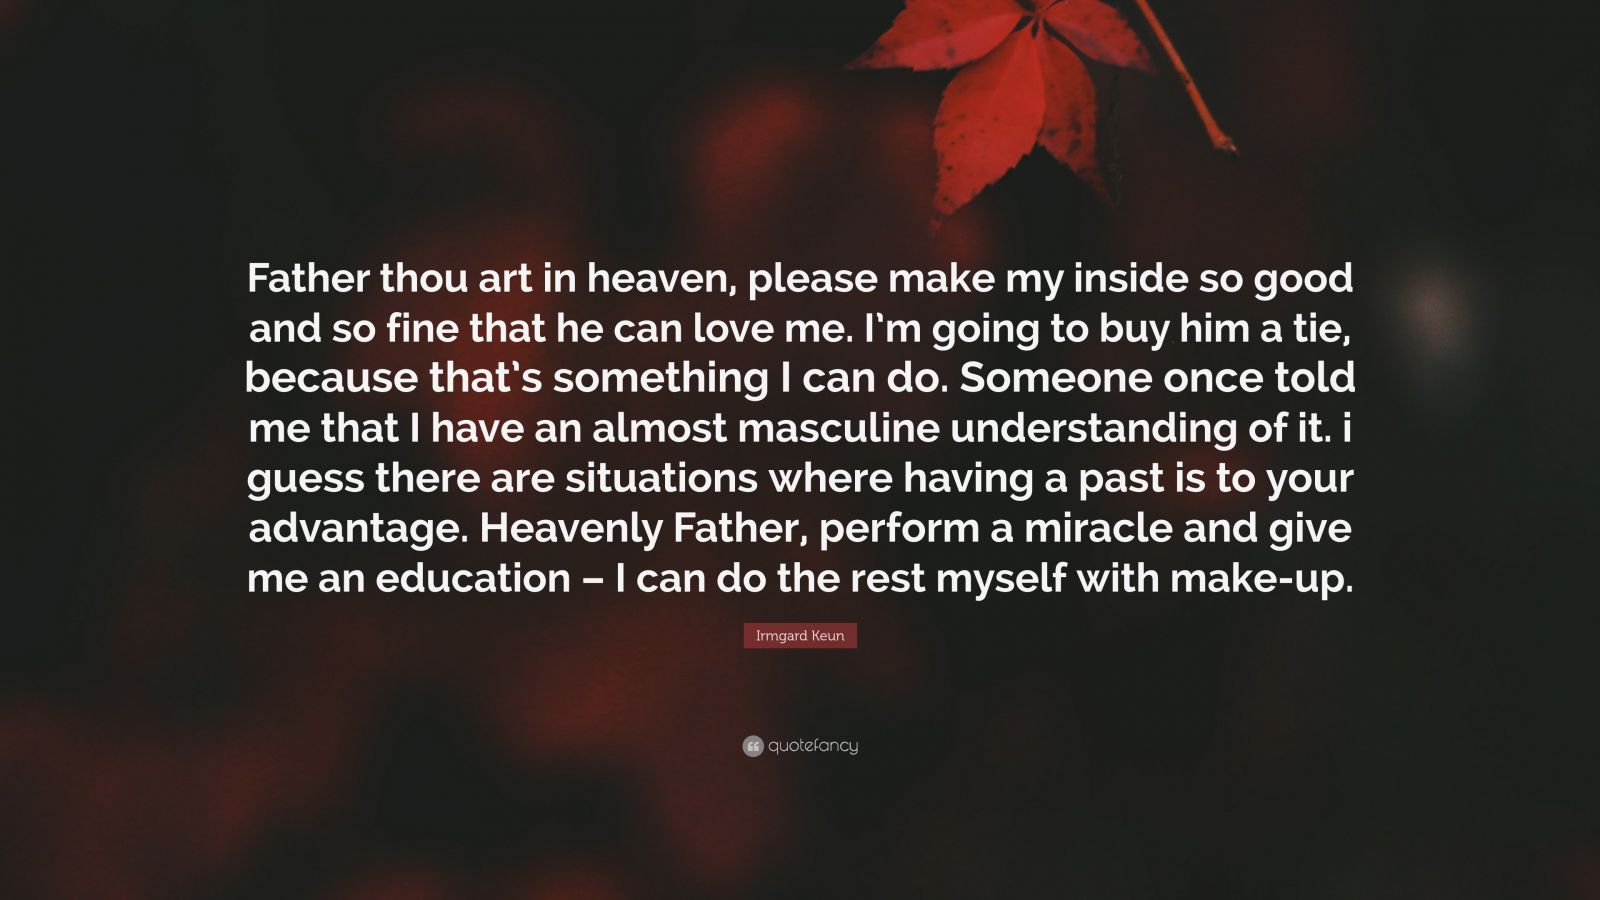 Irmgard Keun Quote Father Thou Art In Heaven Please Make My Inside So Good And So Fine That He Can Love Me I M Going To Buy Him A Tie Be